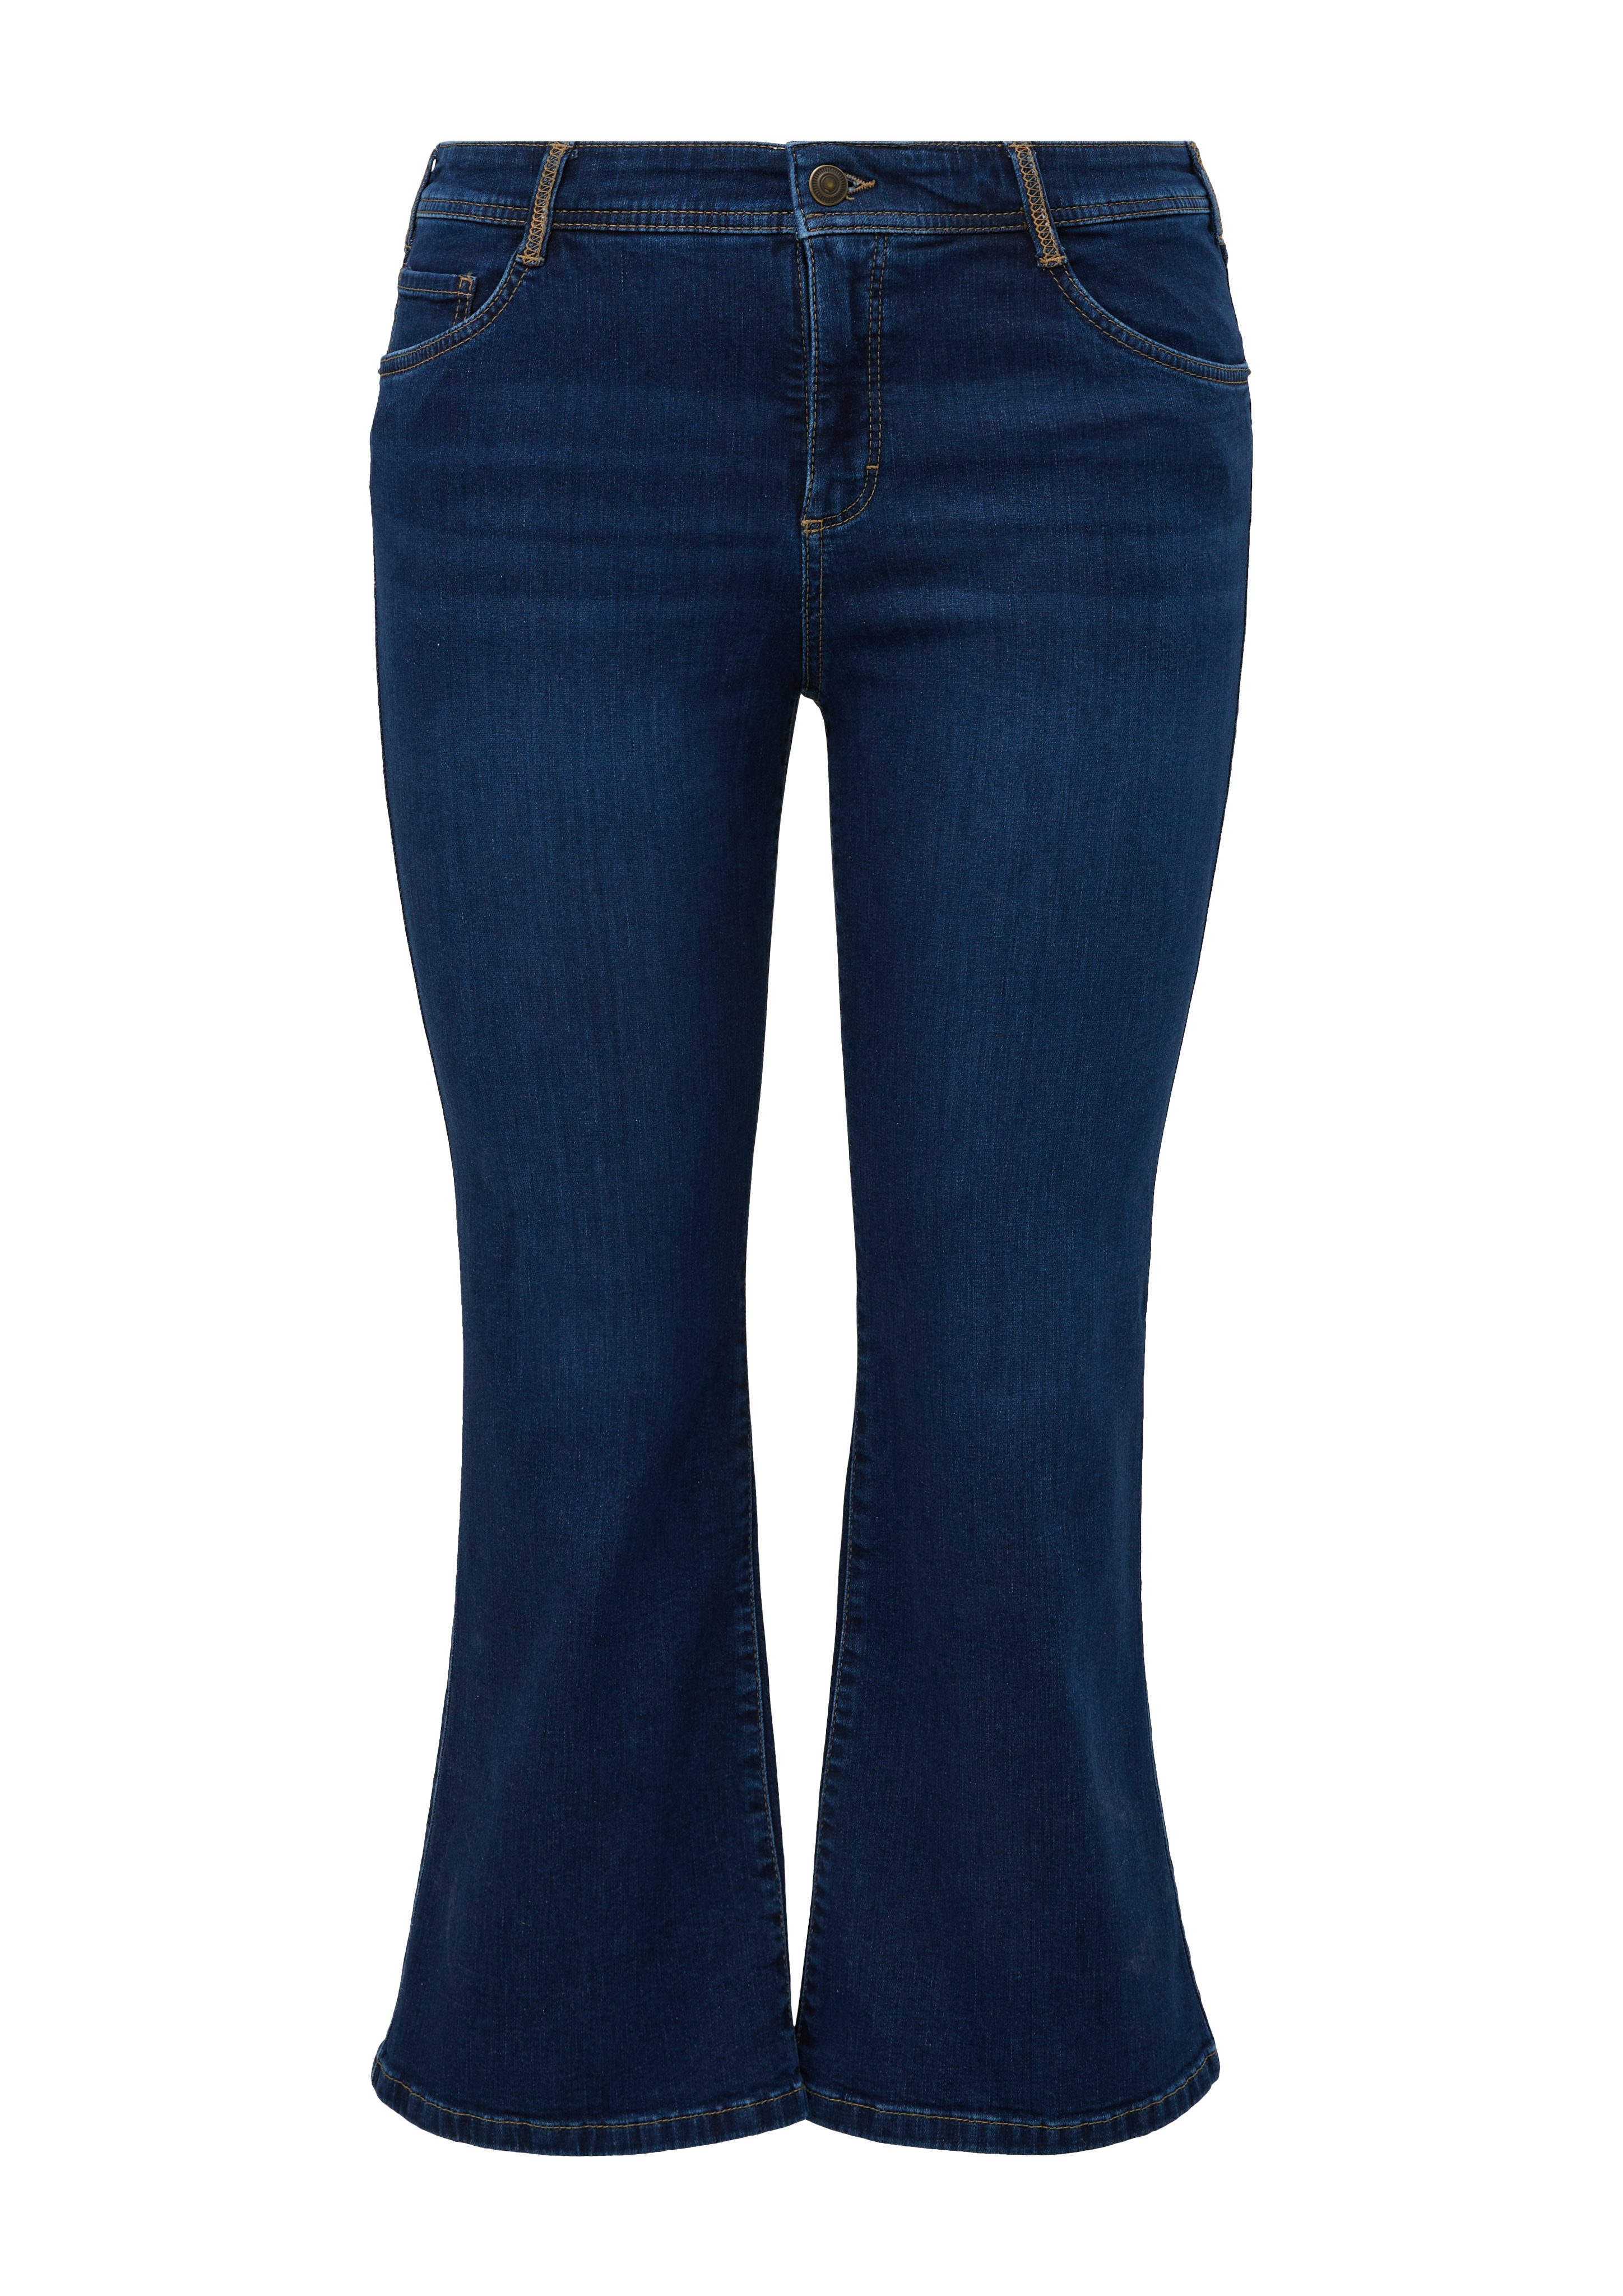 Waschung Flared Ankle-Jeans TRIANGLE Stoffhose leg mit Skinny: